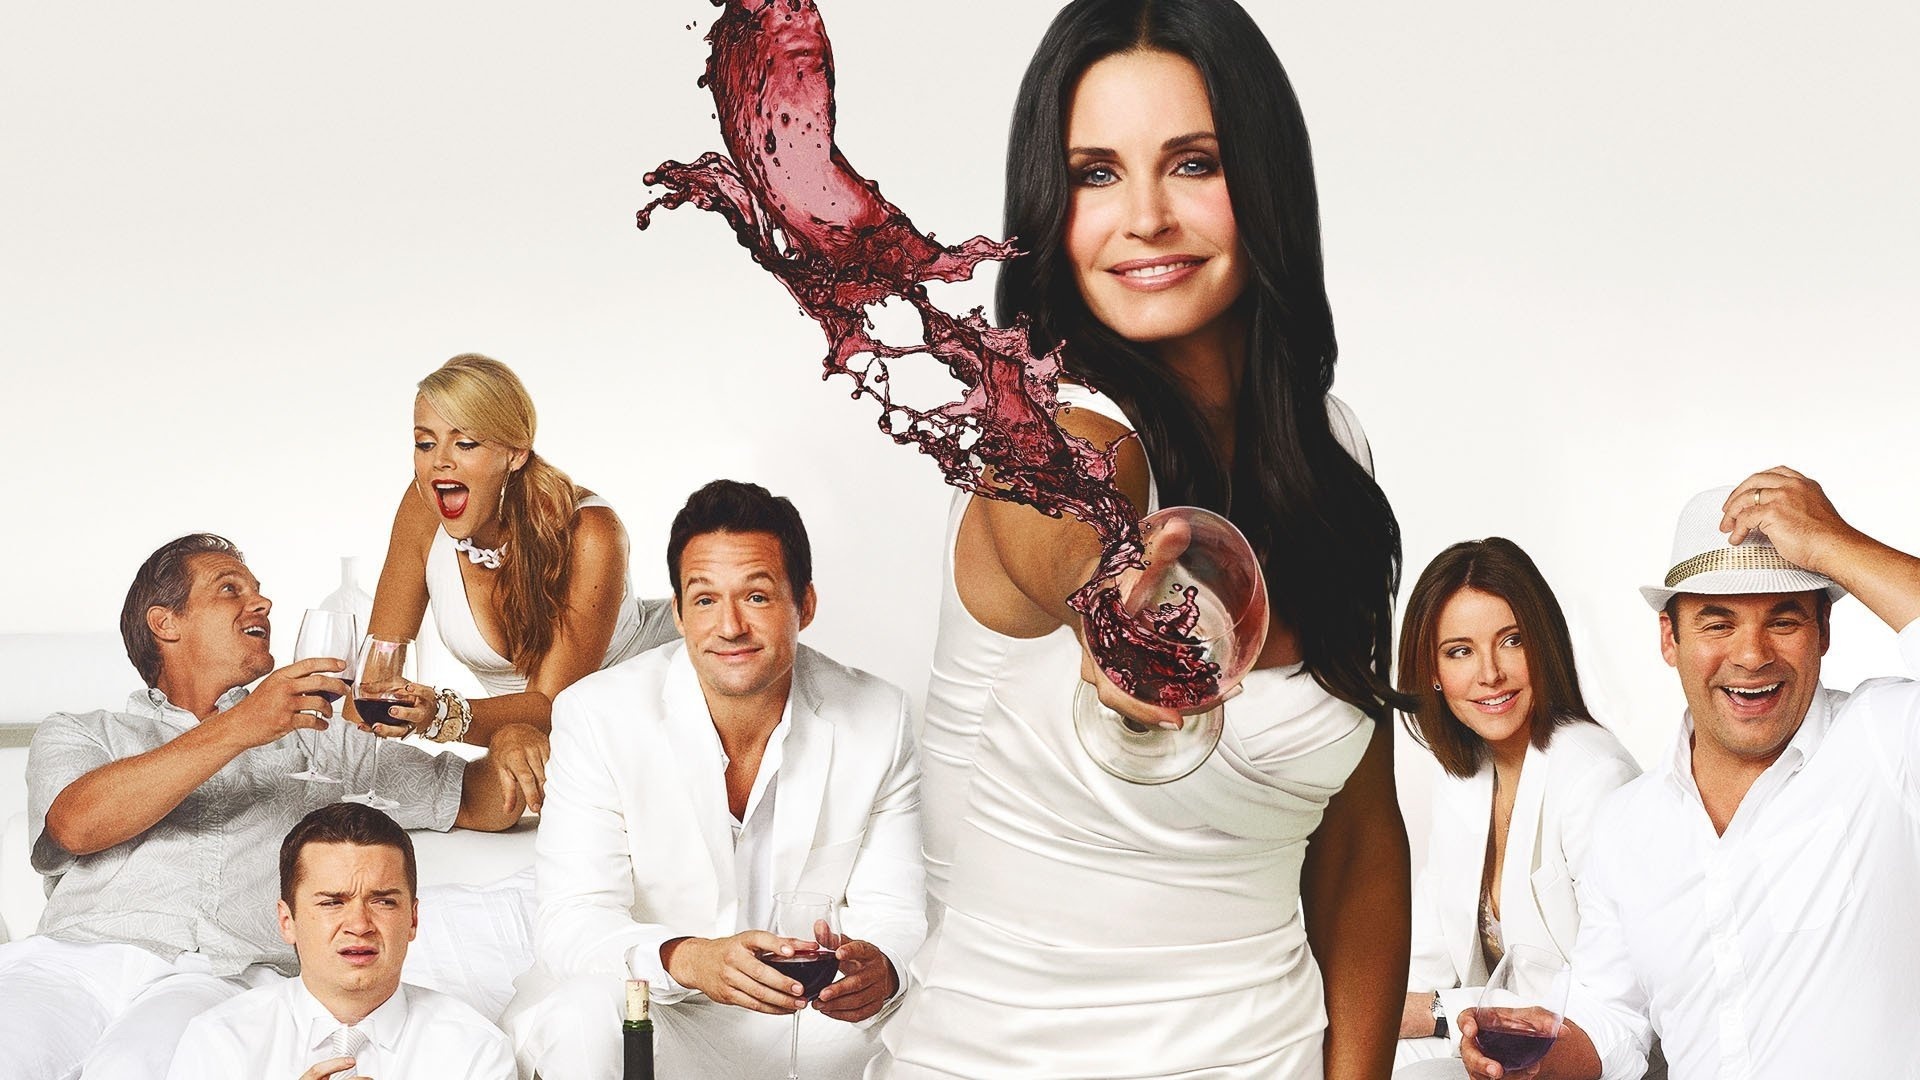 Cougar Town (TV Series): ABC/TBS sitcom, Courtney Cox, Glamour Magazine's Women of the Year Awards. 1920x1080 Full HD Background.